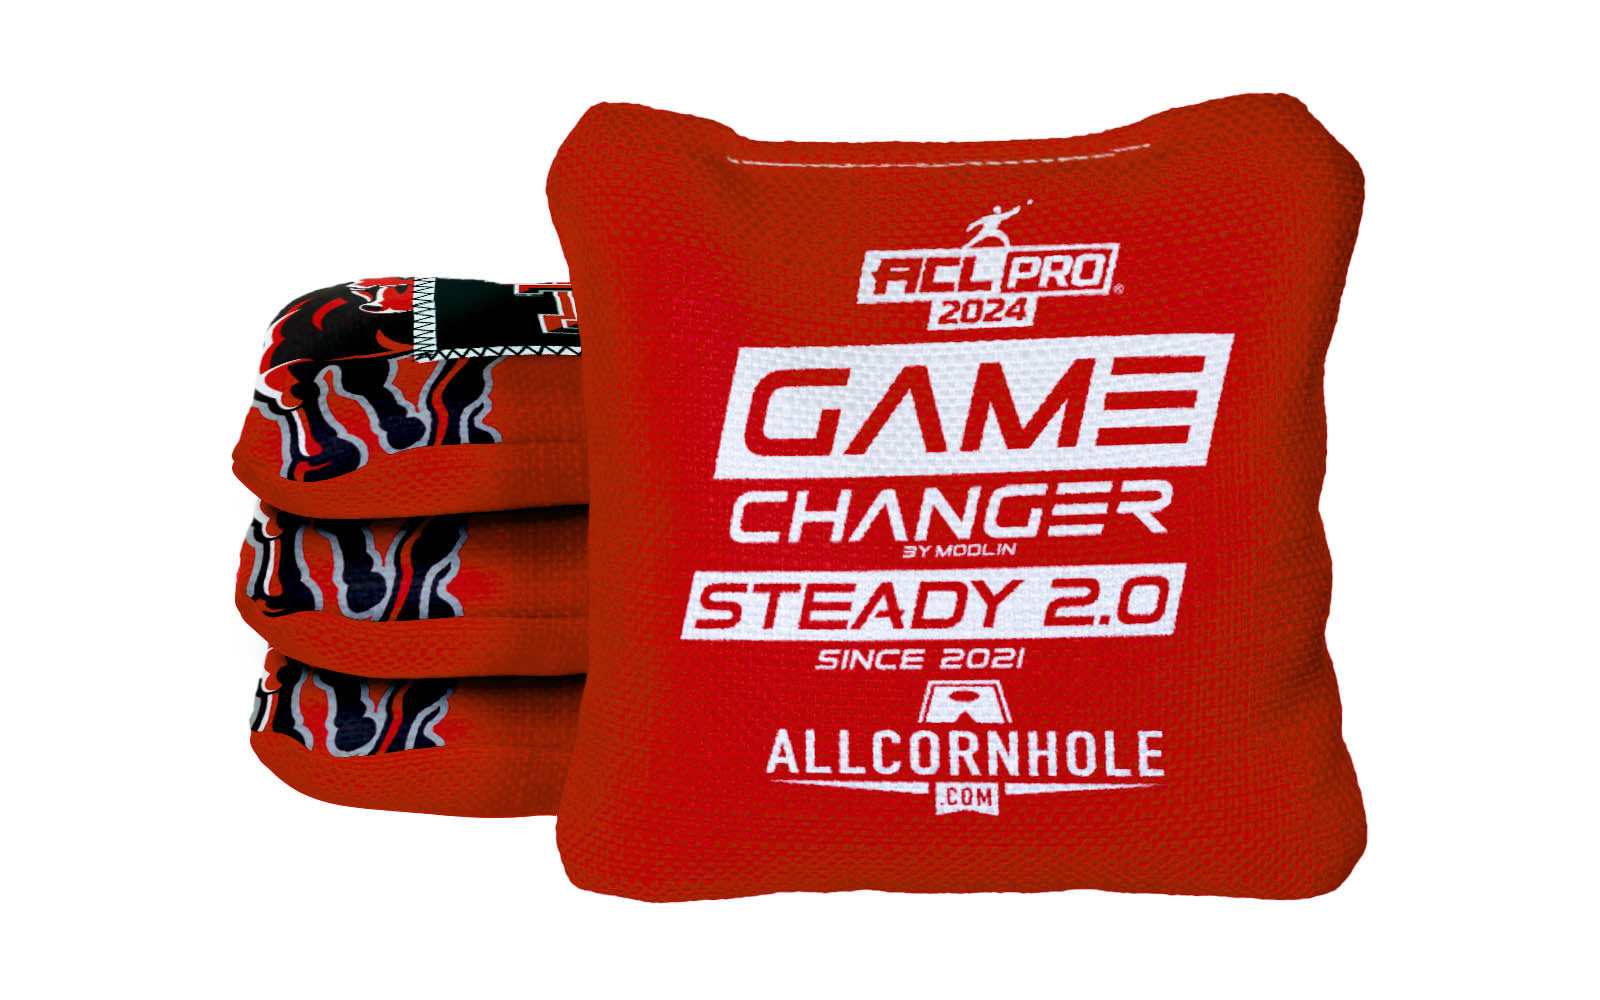 Officially Licensed Collegiate Cornhole Bags - AllCornhole Game Changers Steady 2.0 - Set of 4 - Texas Tech University